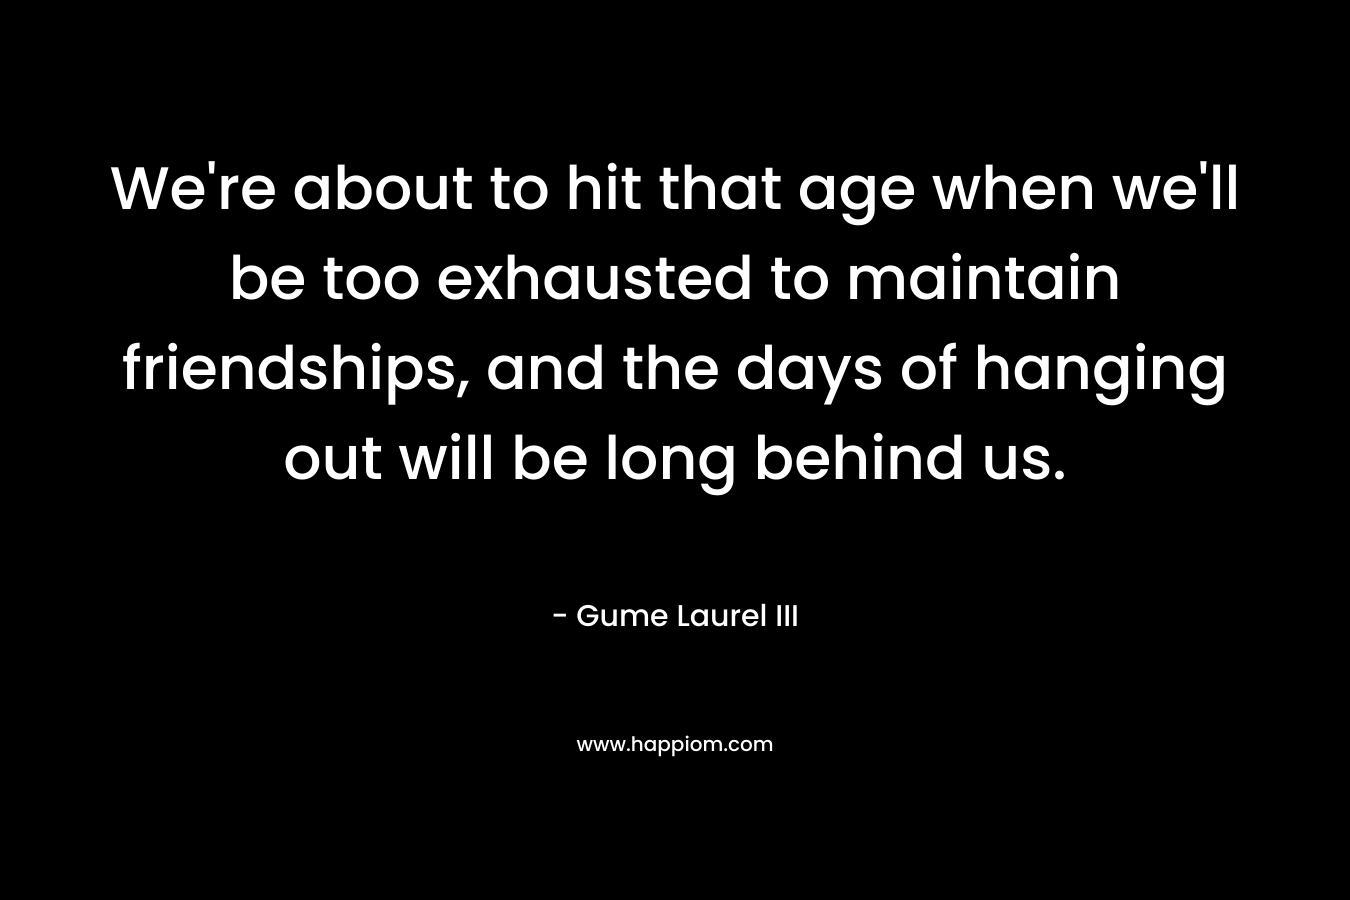 We’re about to hit that age when we’ll be too exhausted to maintain friendships, and the days of hanging out will be long behind us. – Gume Laurel III